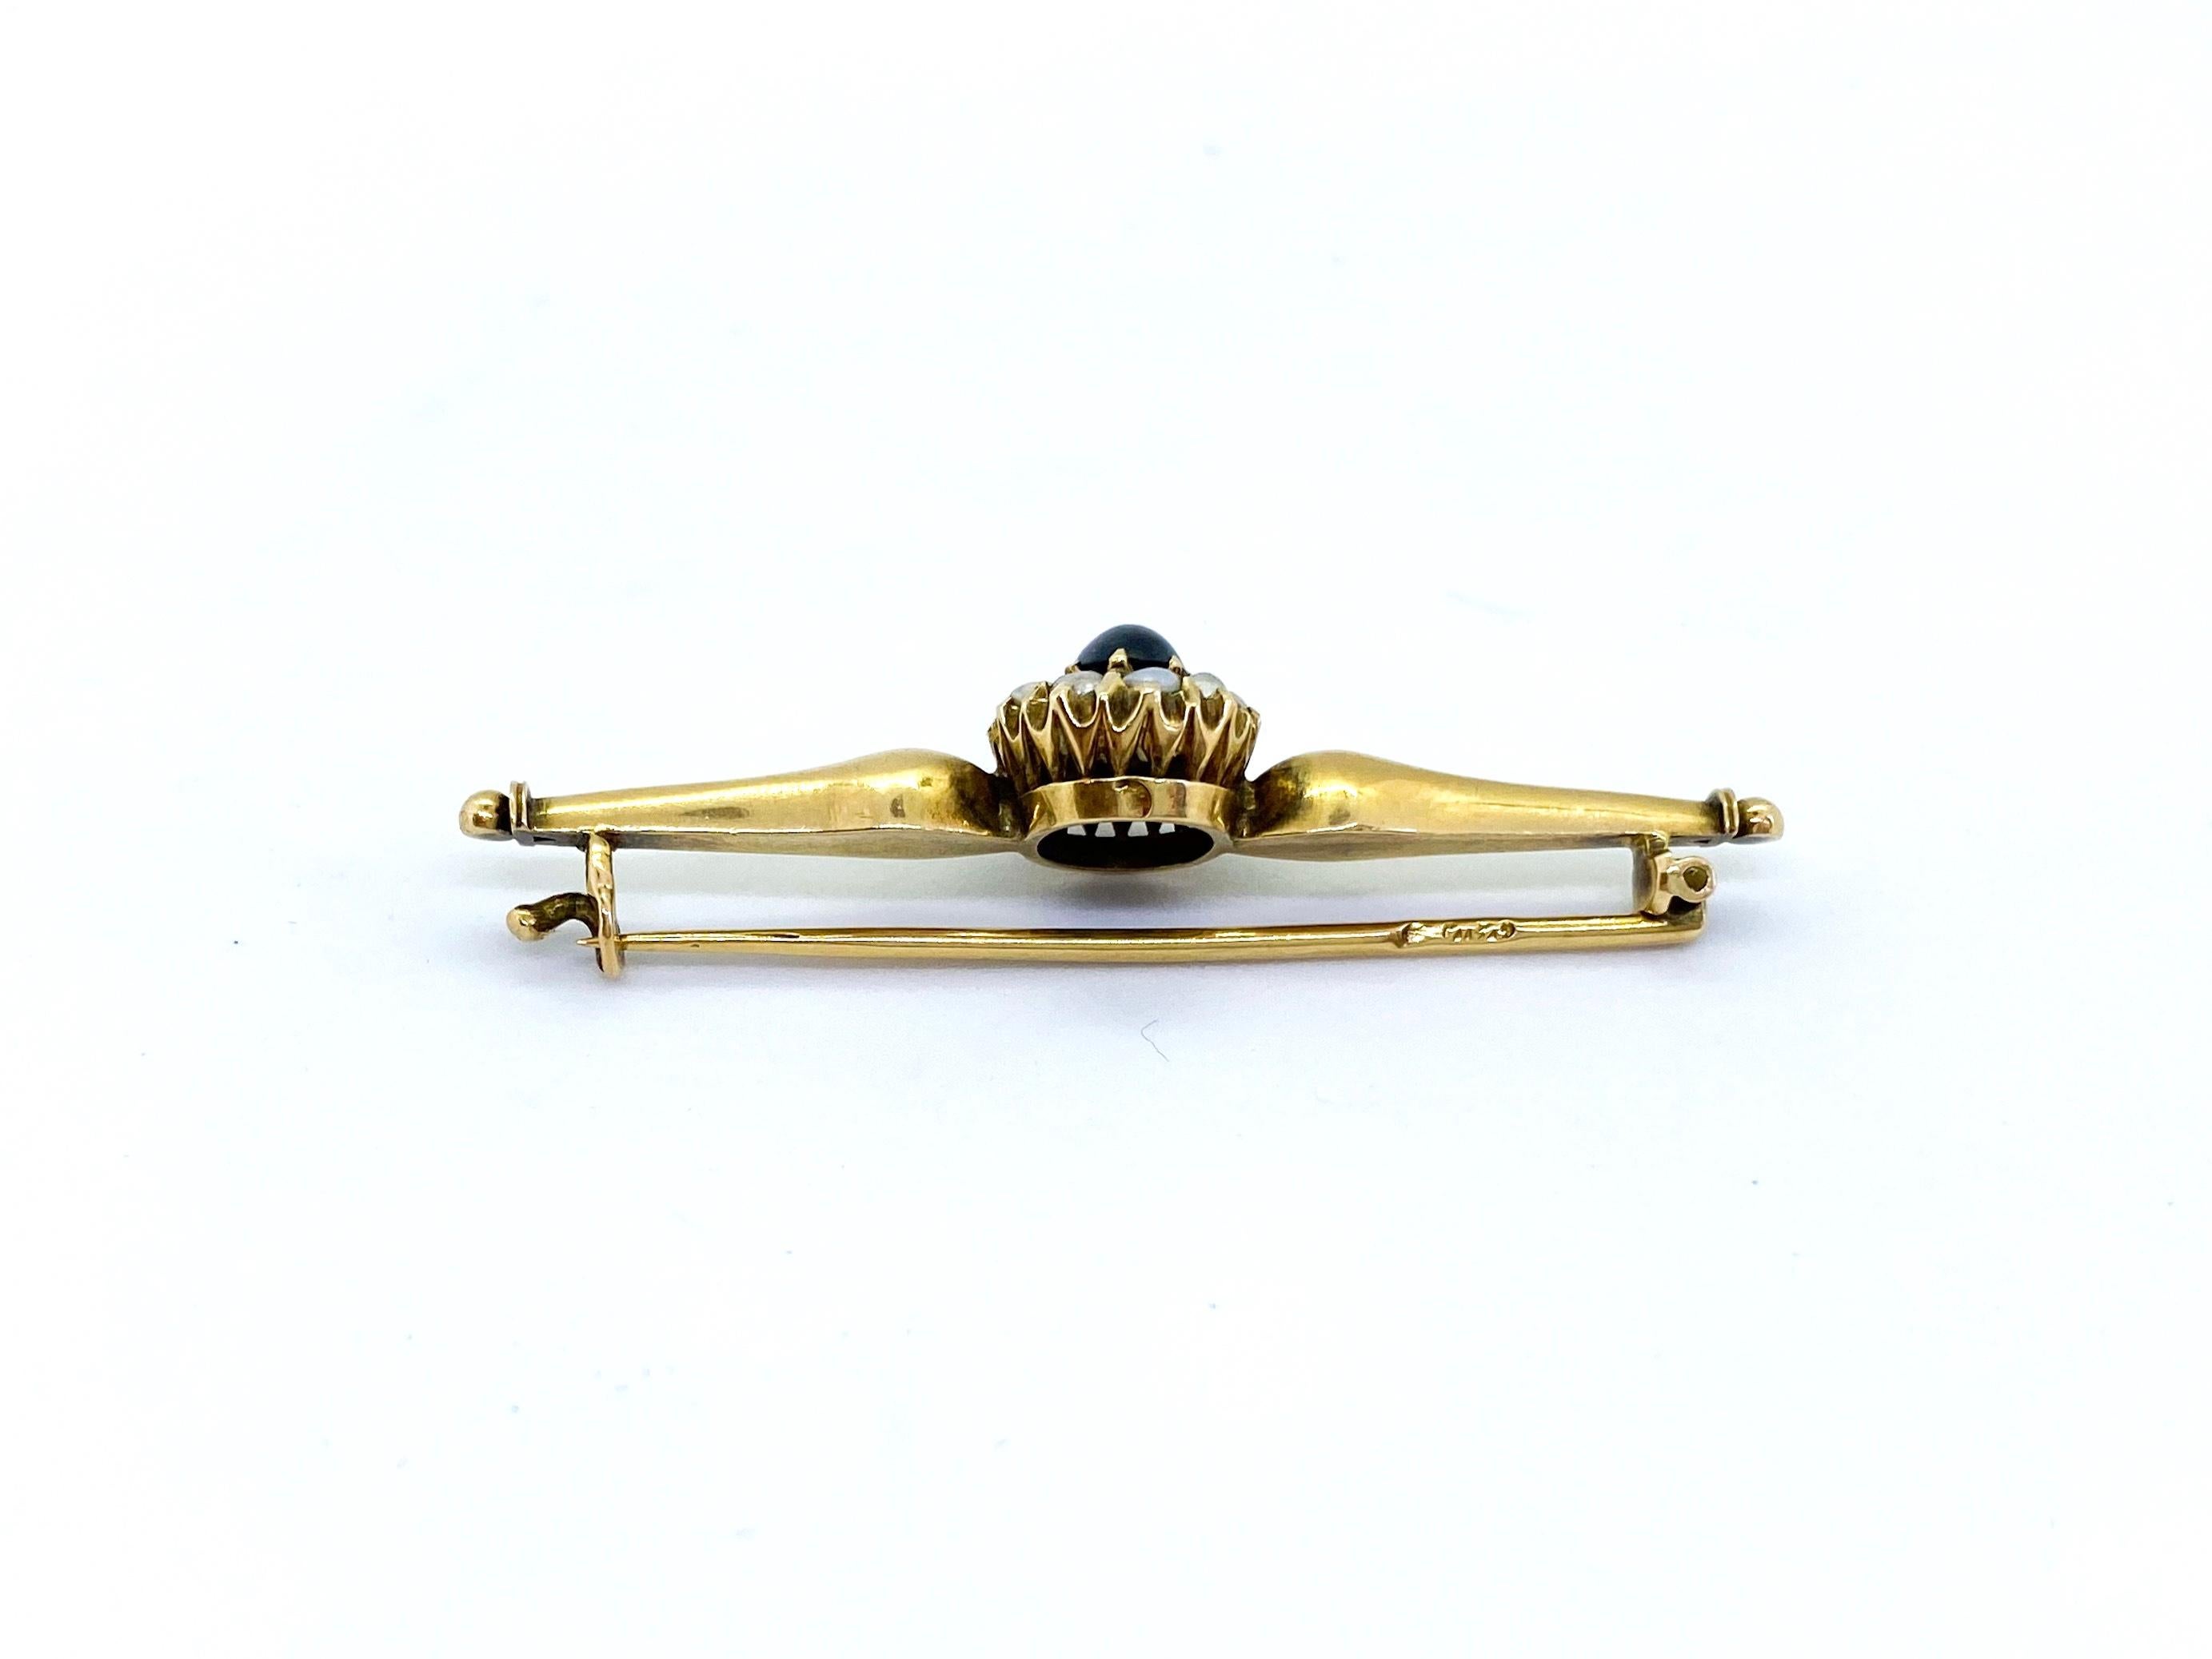 14 Carat Yellow Gold Russia 1.05ct Sapphire Pearls Brooch
Stamp 56 Rissian Gold